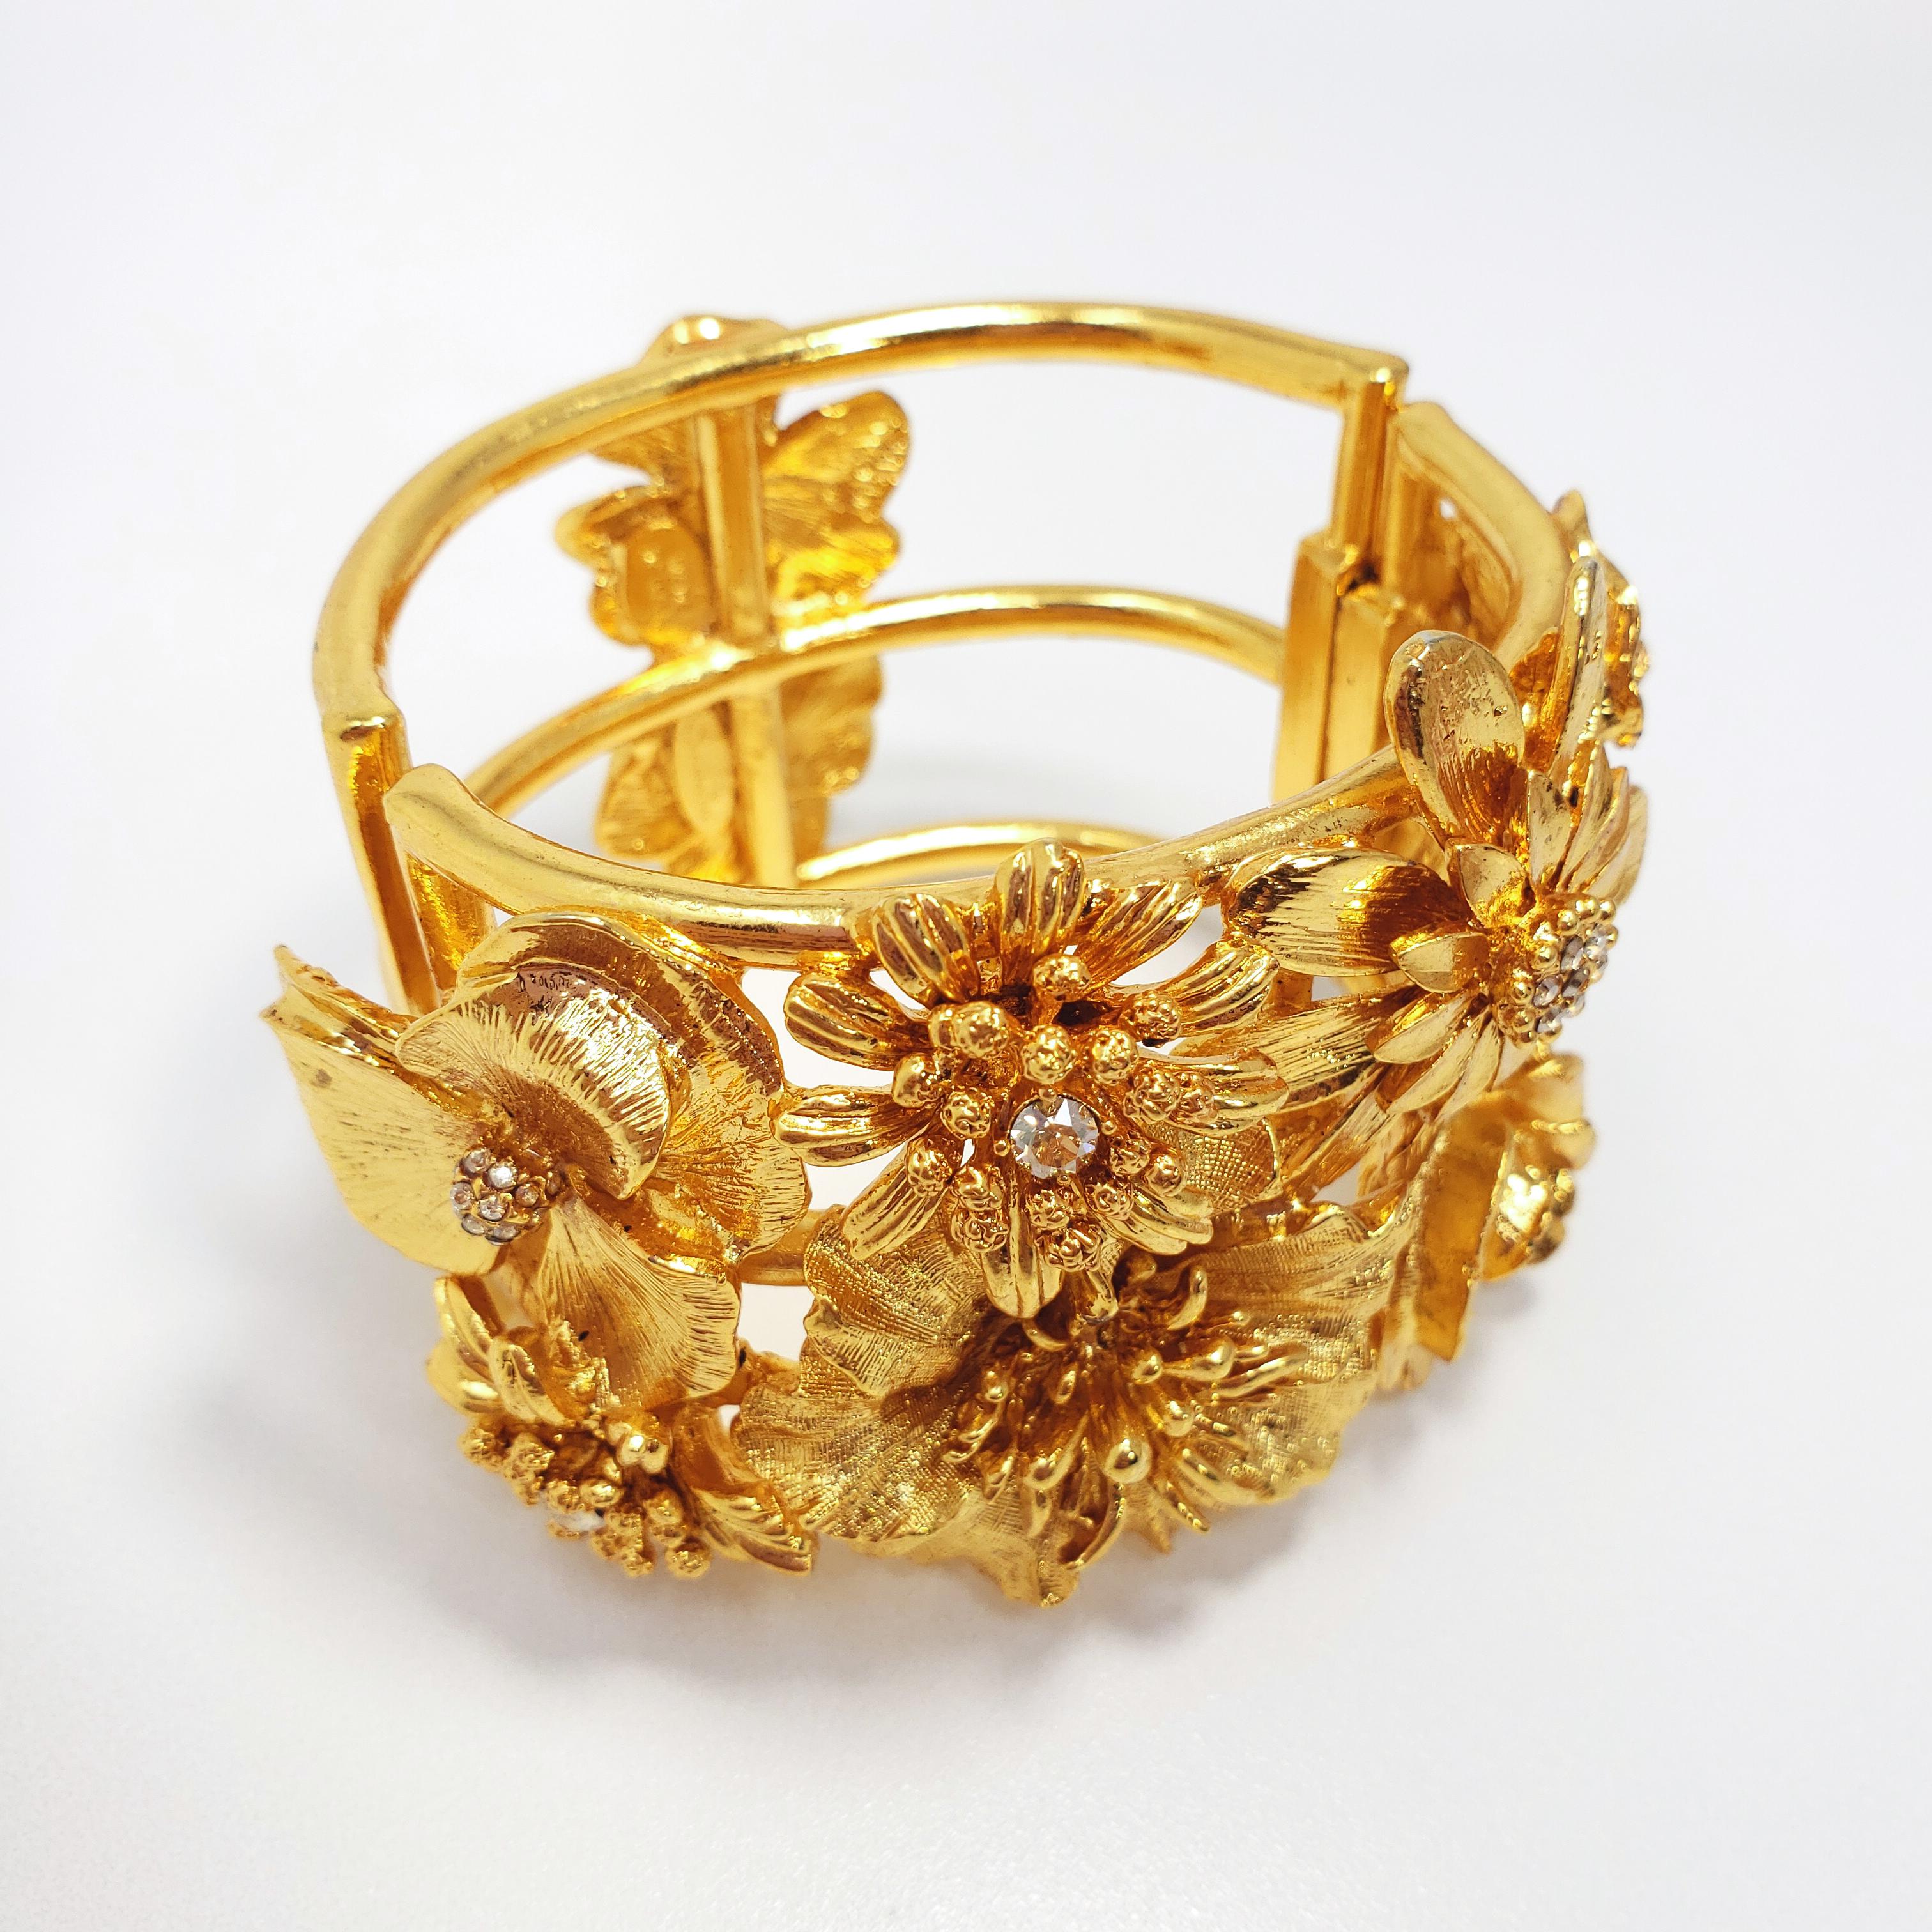 Bold and bright floral bracelet - features an assortment of blooming golden flowers accented with clear crystals. In the traditional bold Oscar de la Renta style!

Hallmarks: Oscar de la Renta, Made in USA
Dimensions: Inner circumference approx 6.5